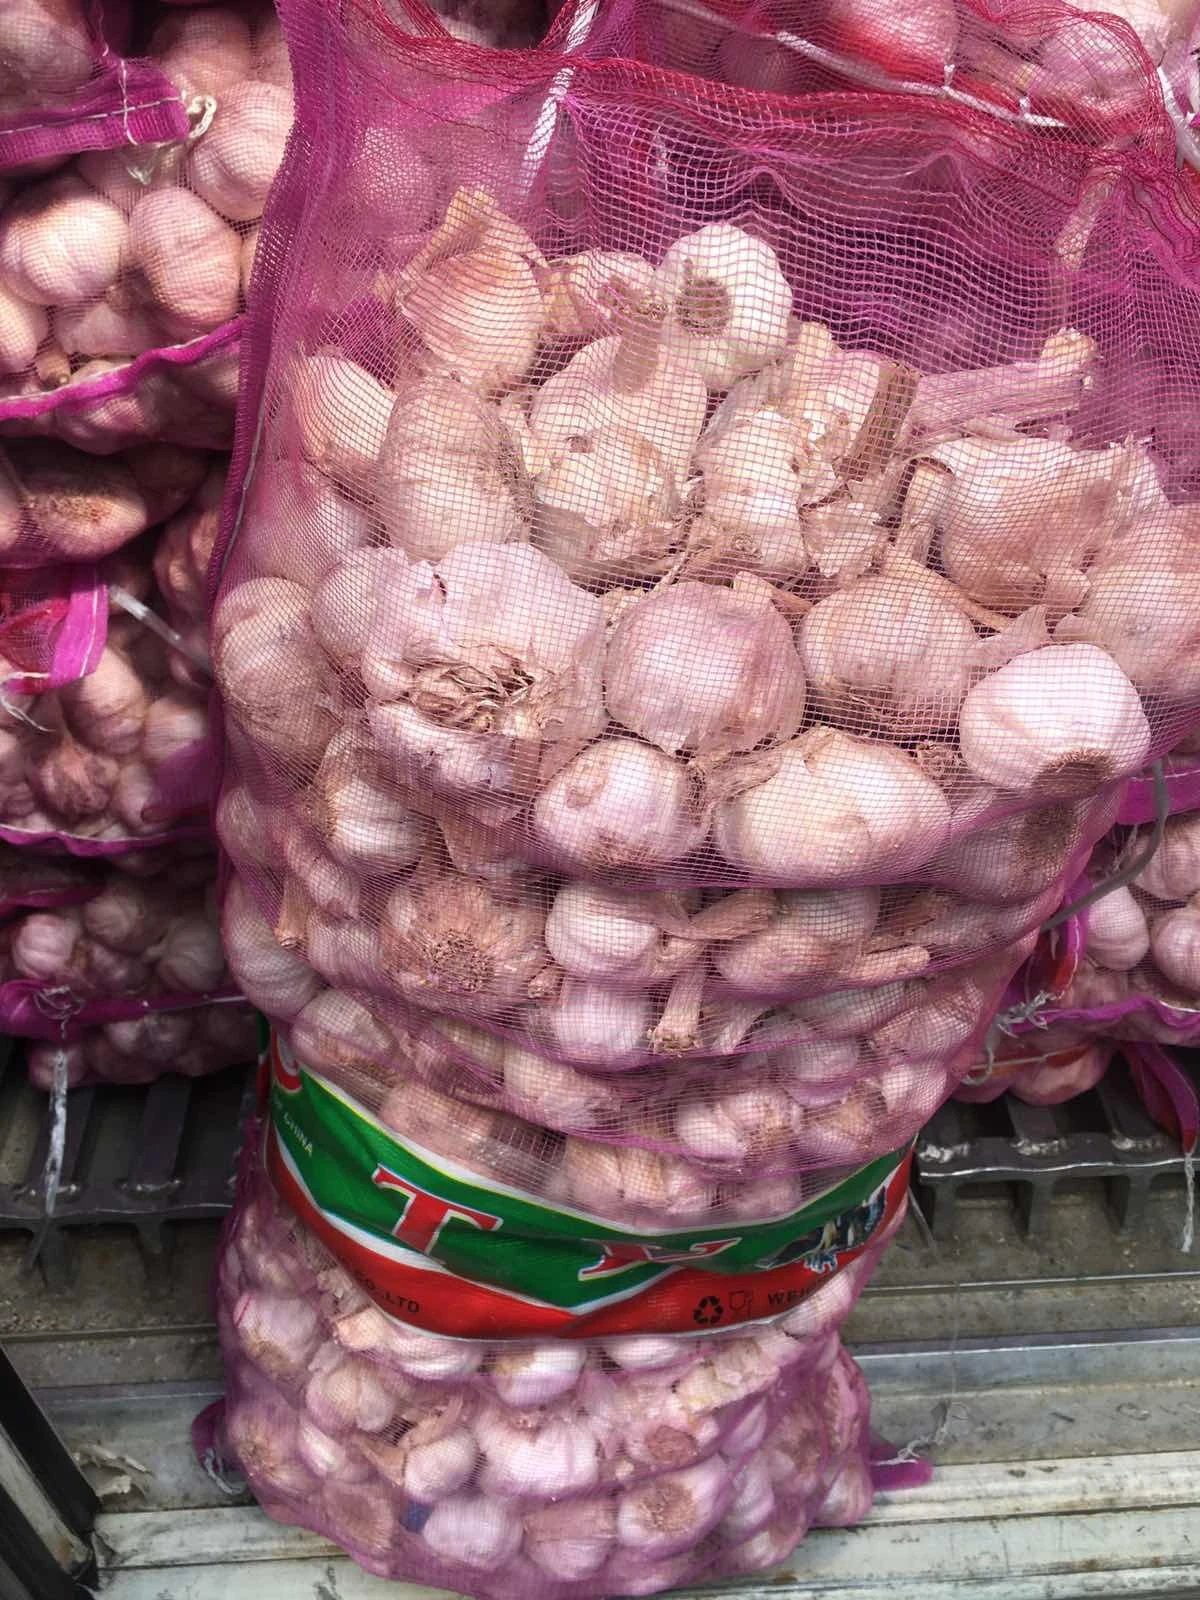 Best Agricultural Export Of Fresh Garlic With Phytosanitary Certificate Used For Cooking From Viet Nam